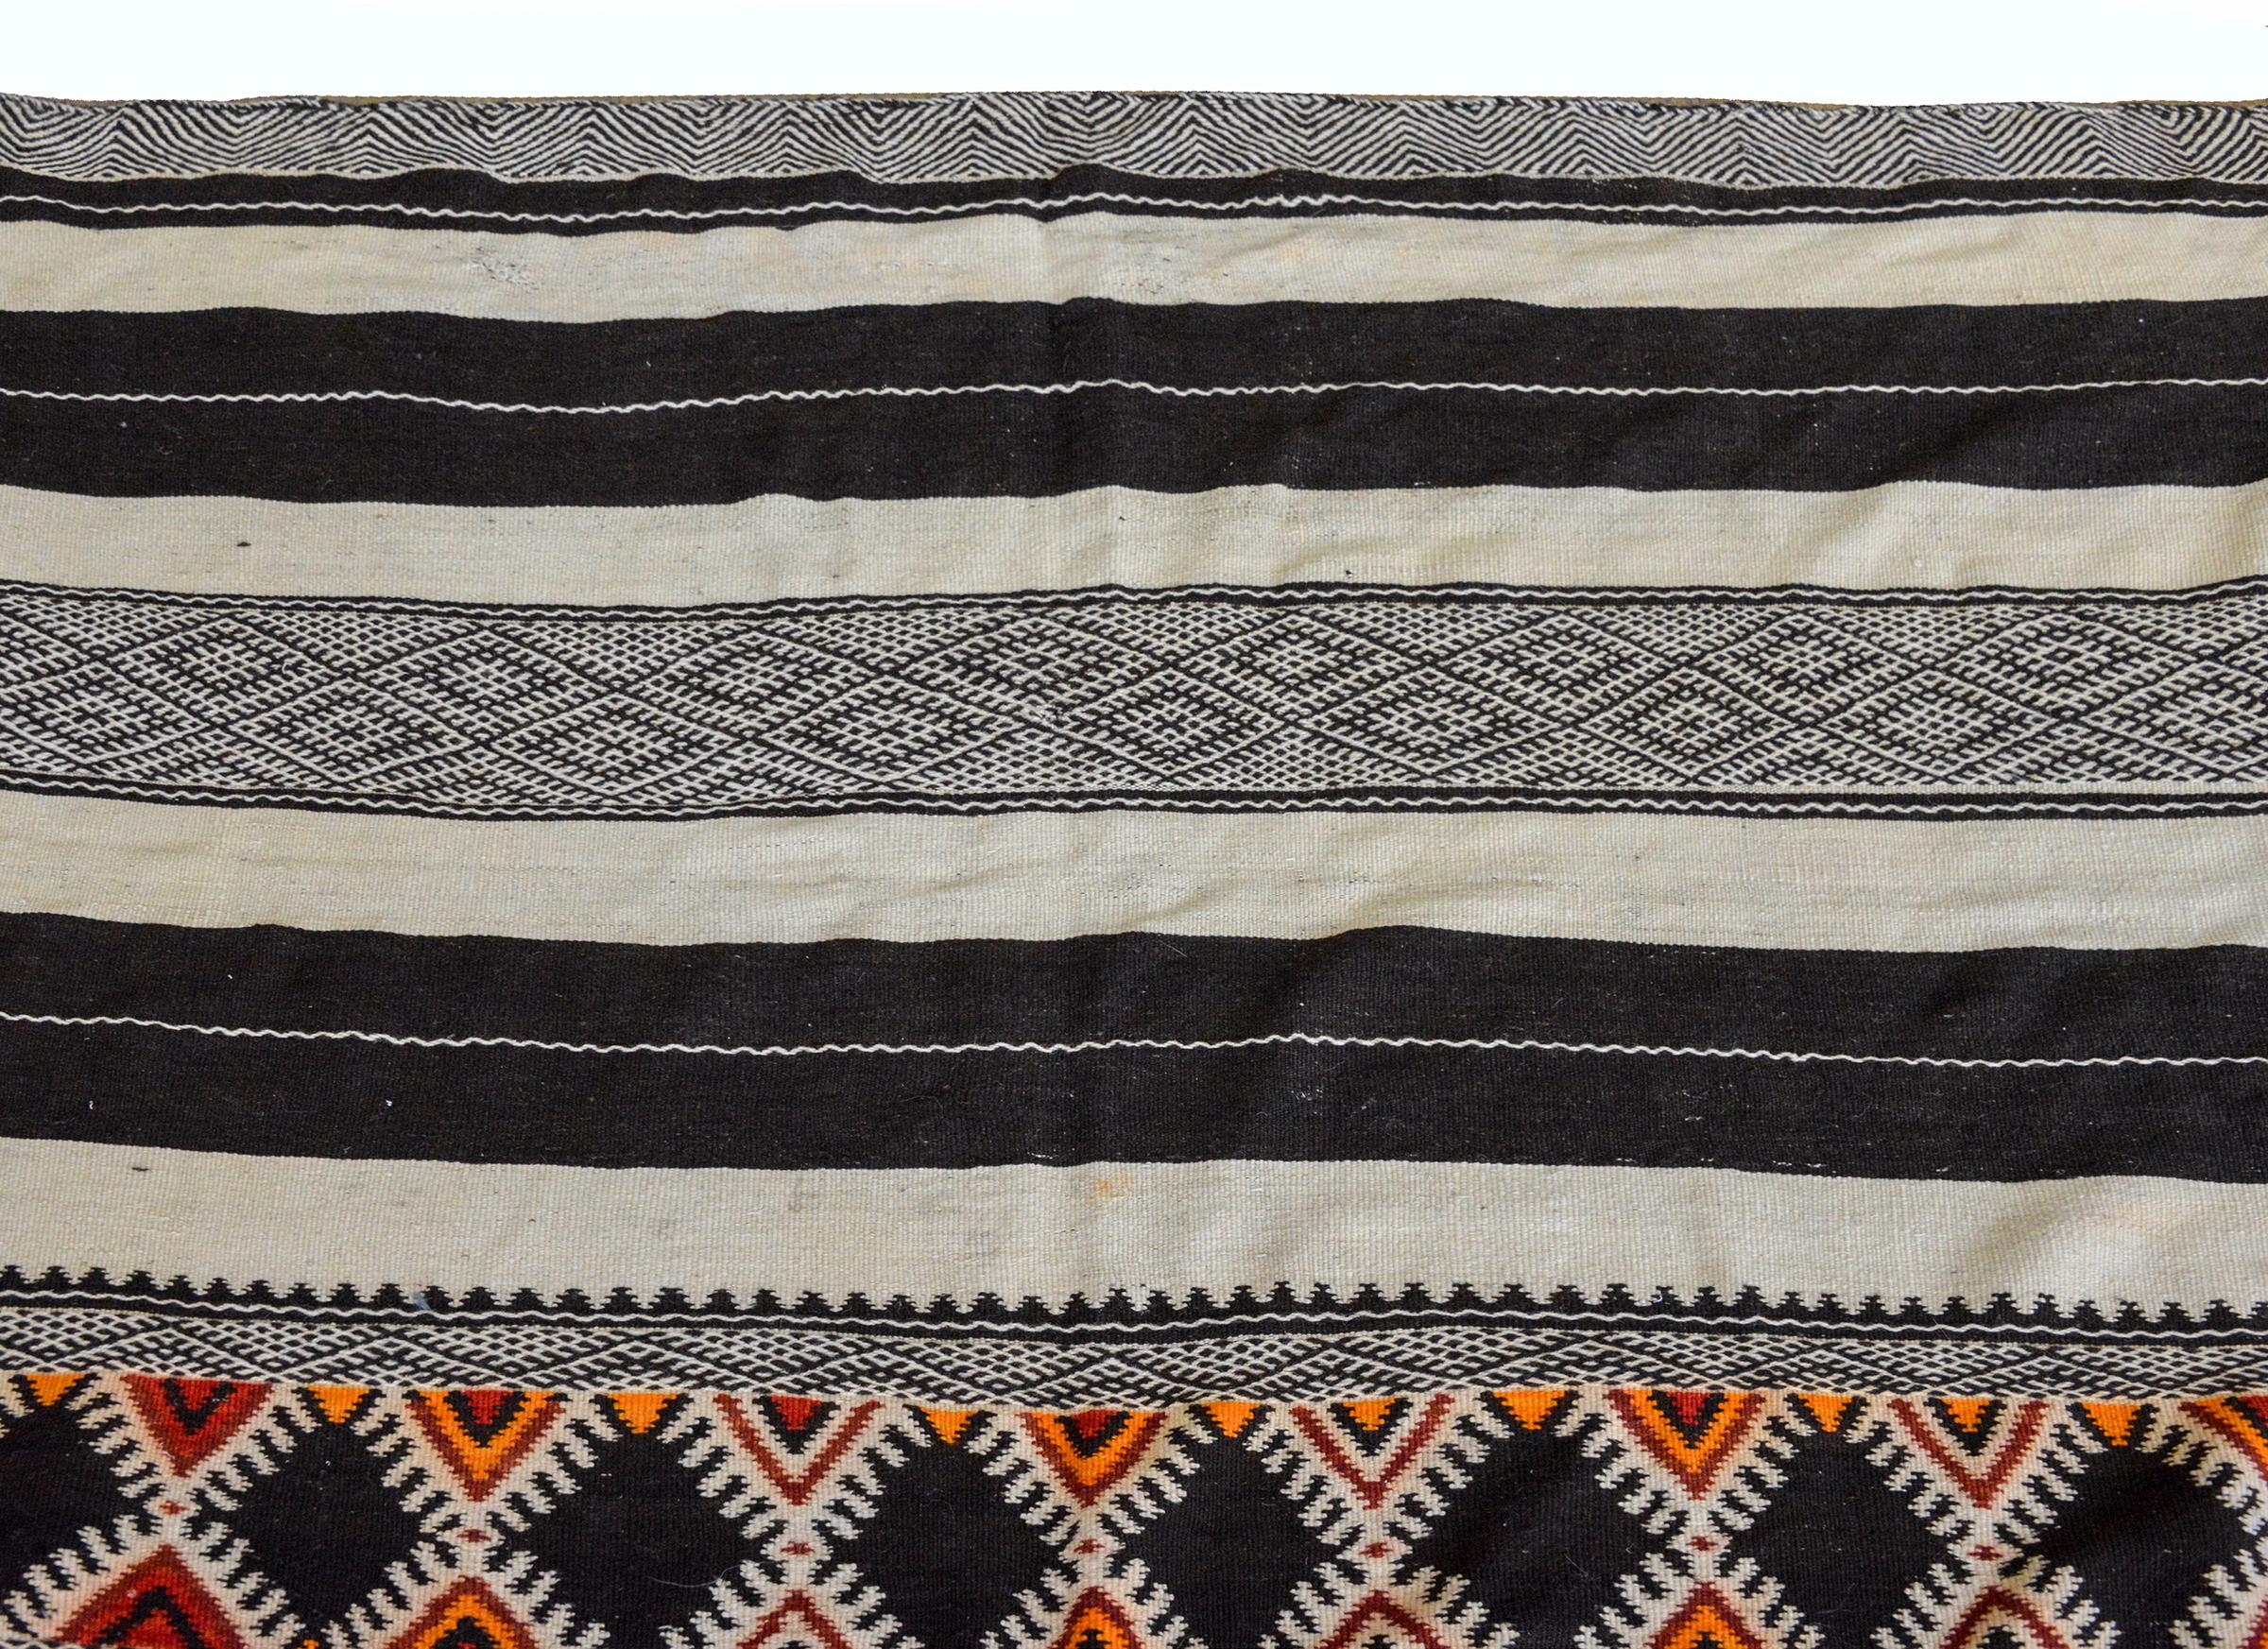 A wonderful mid-20th century Moroccan kilim runner with alternating multi-colored stripes all woven with geometric pattered.